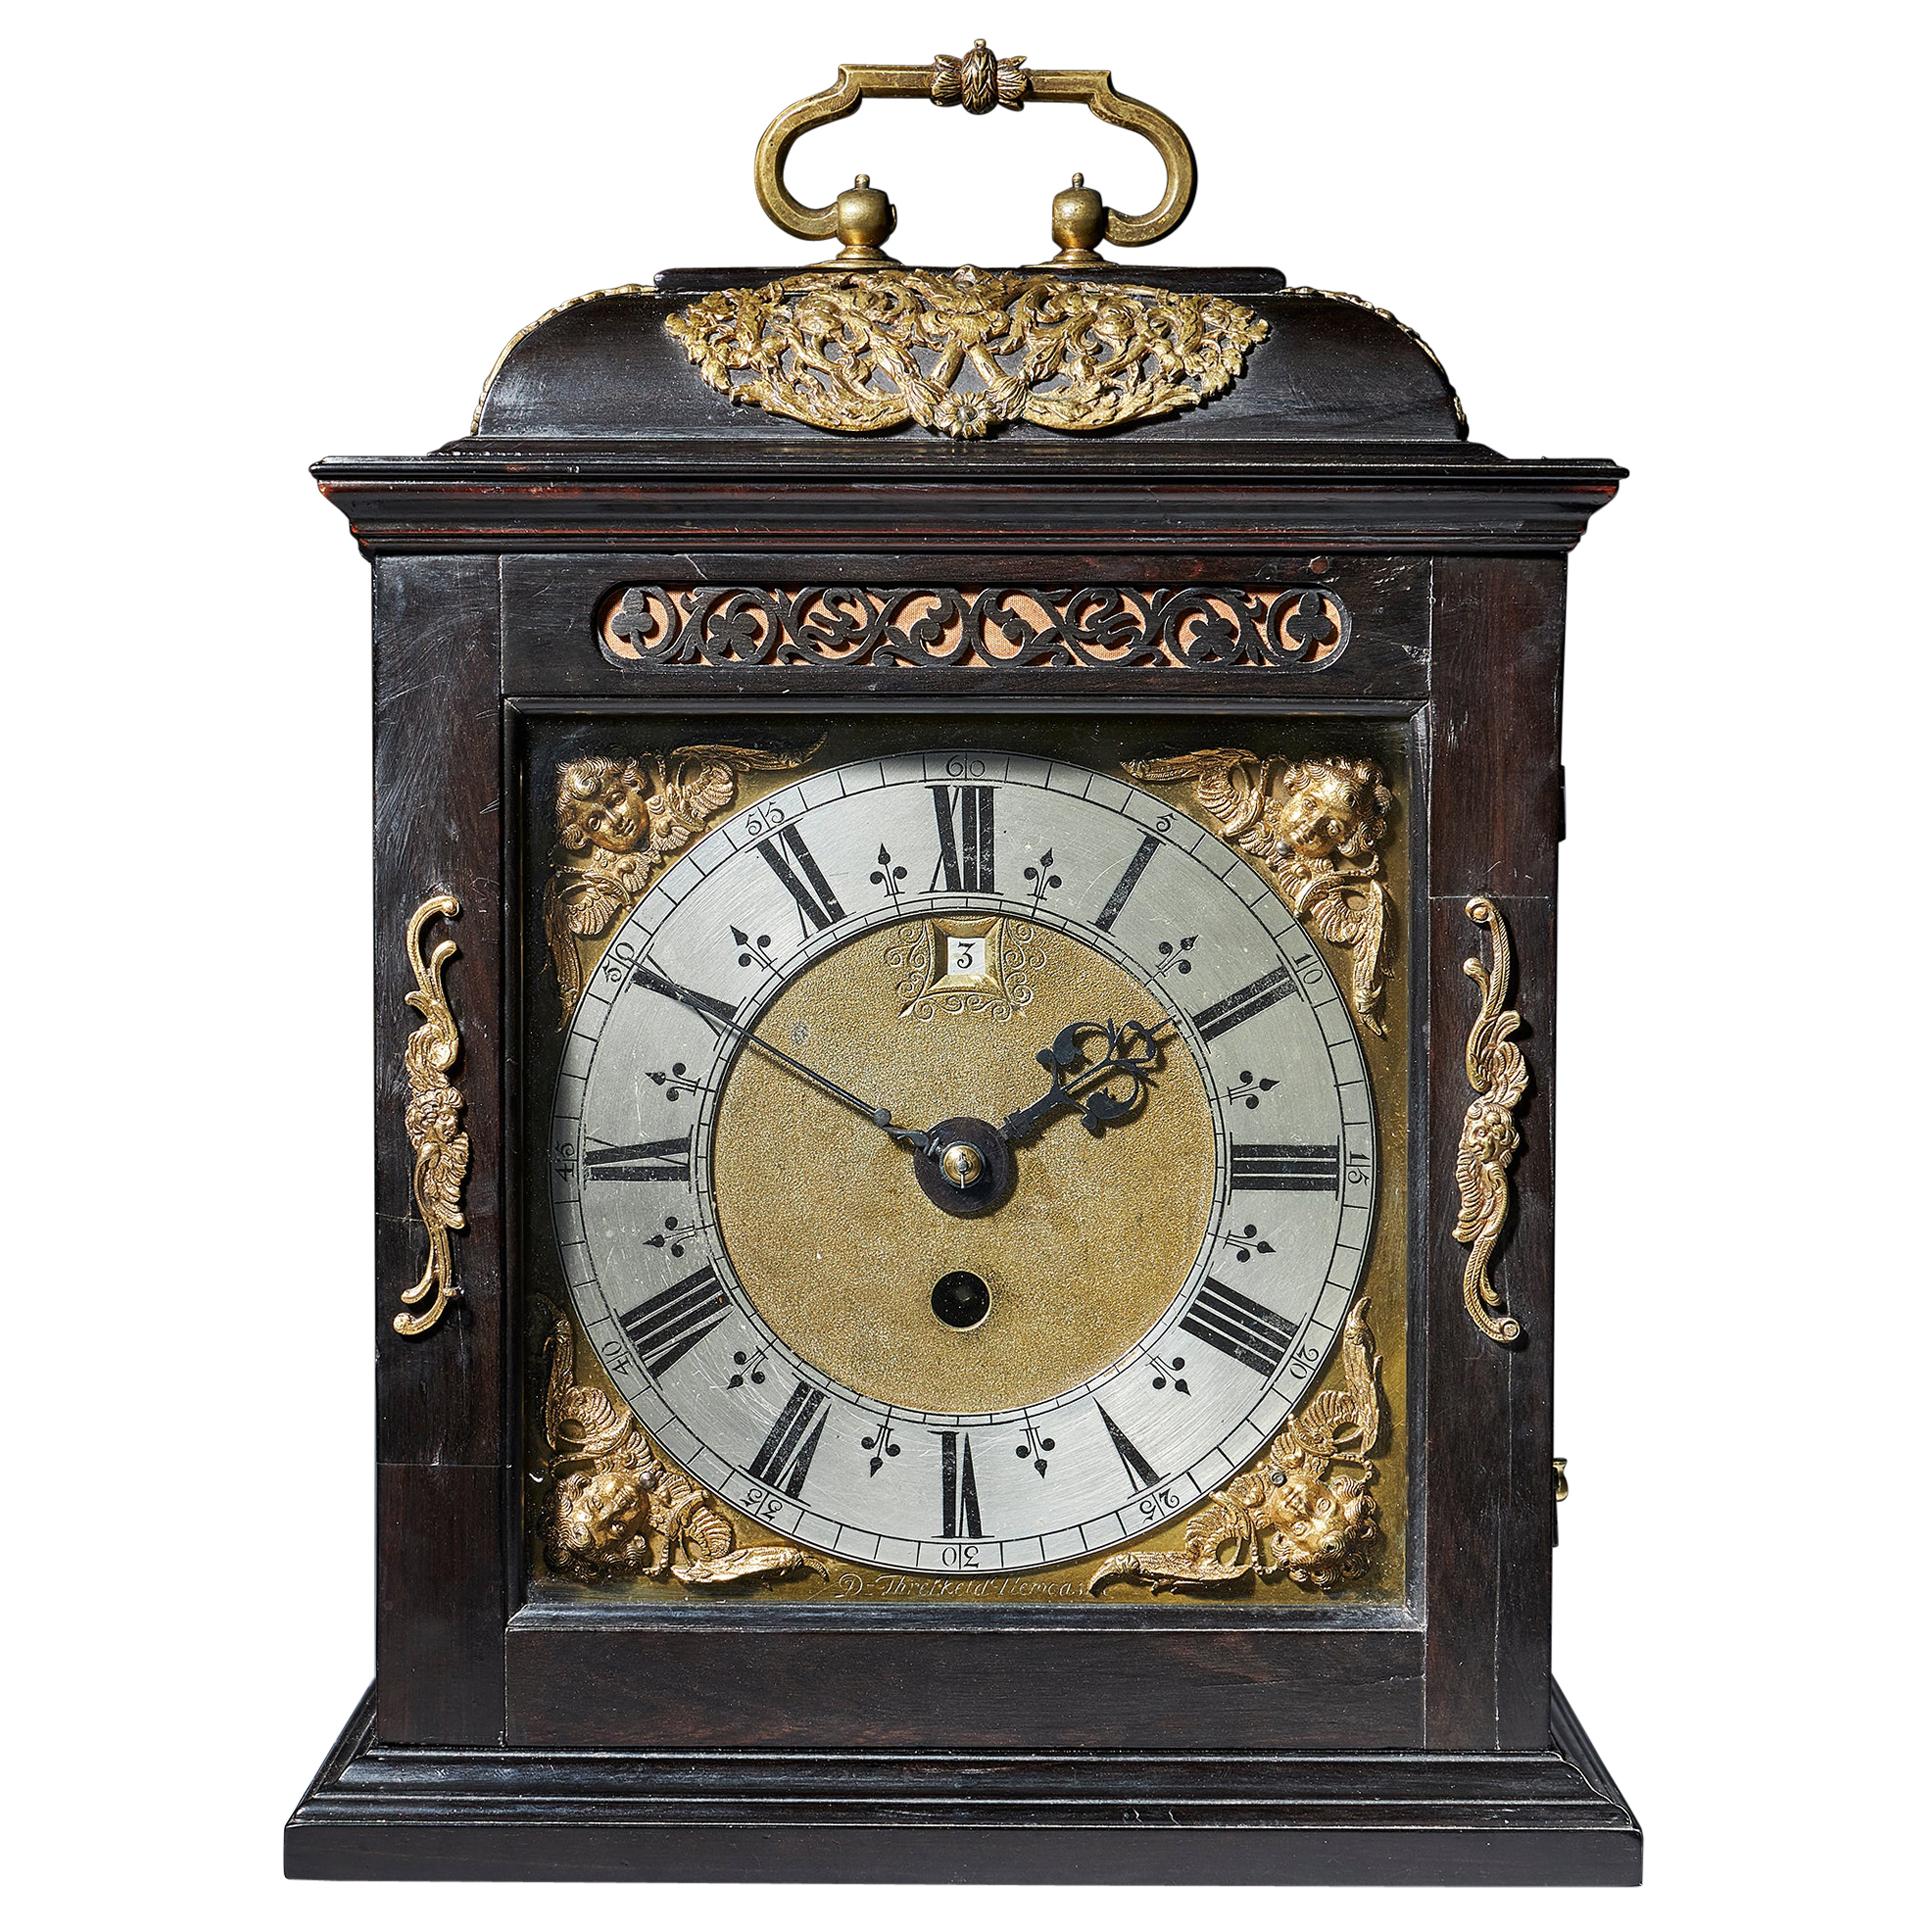 Fine 17th Century Charles II Spring Driven Table Clock by Deodatus Threlkeld